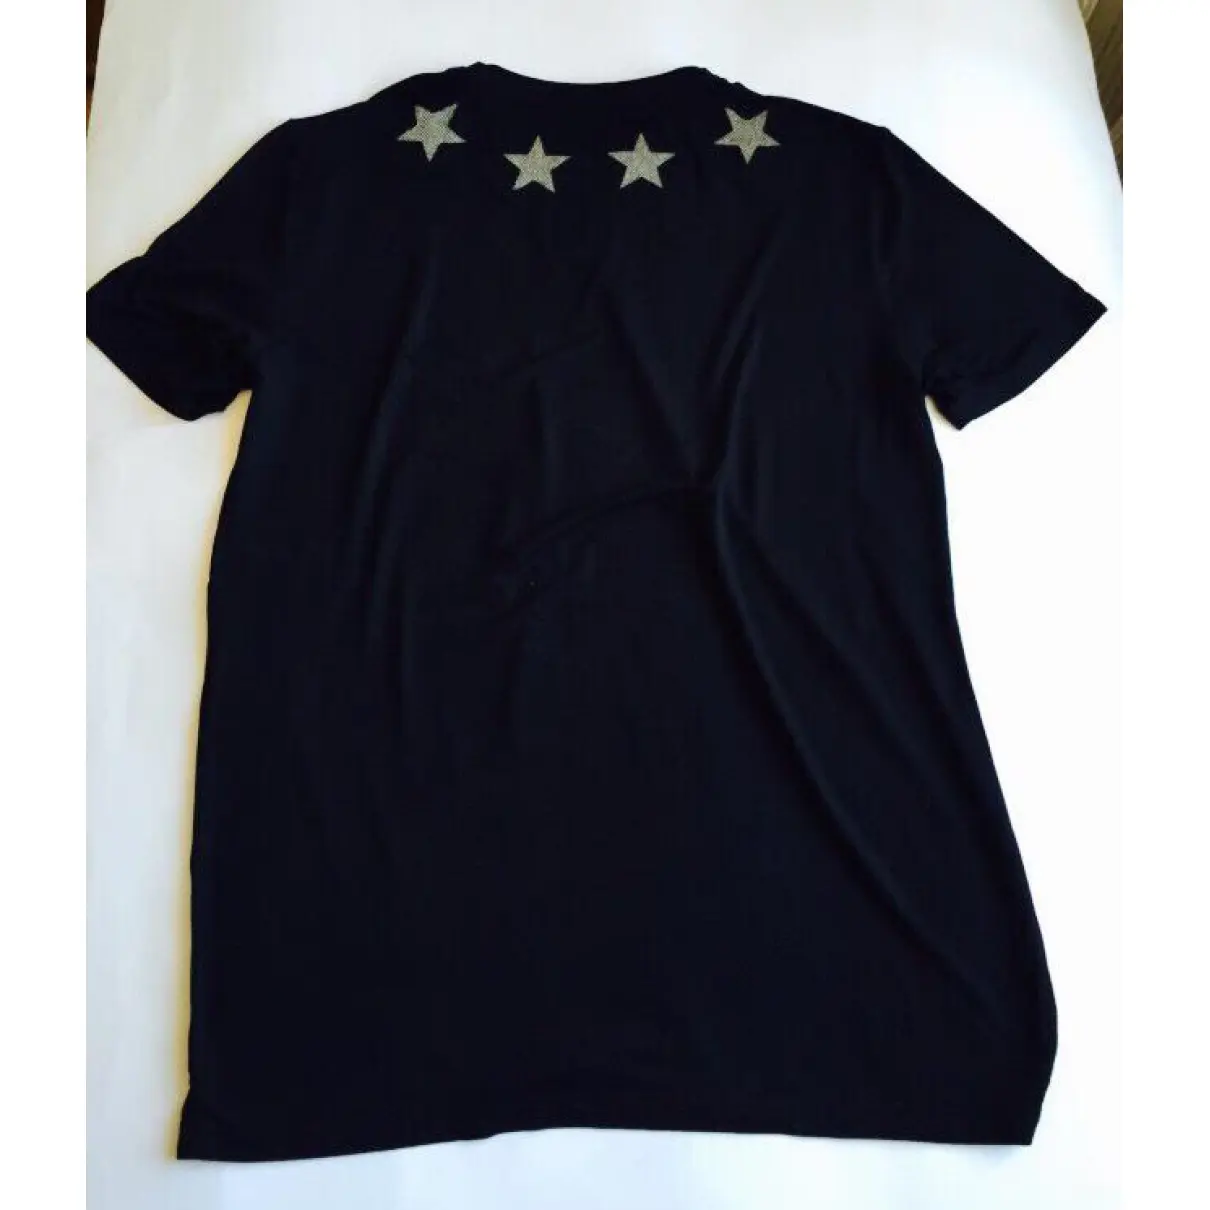 Buy Givenchy T-shirt online